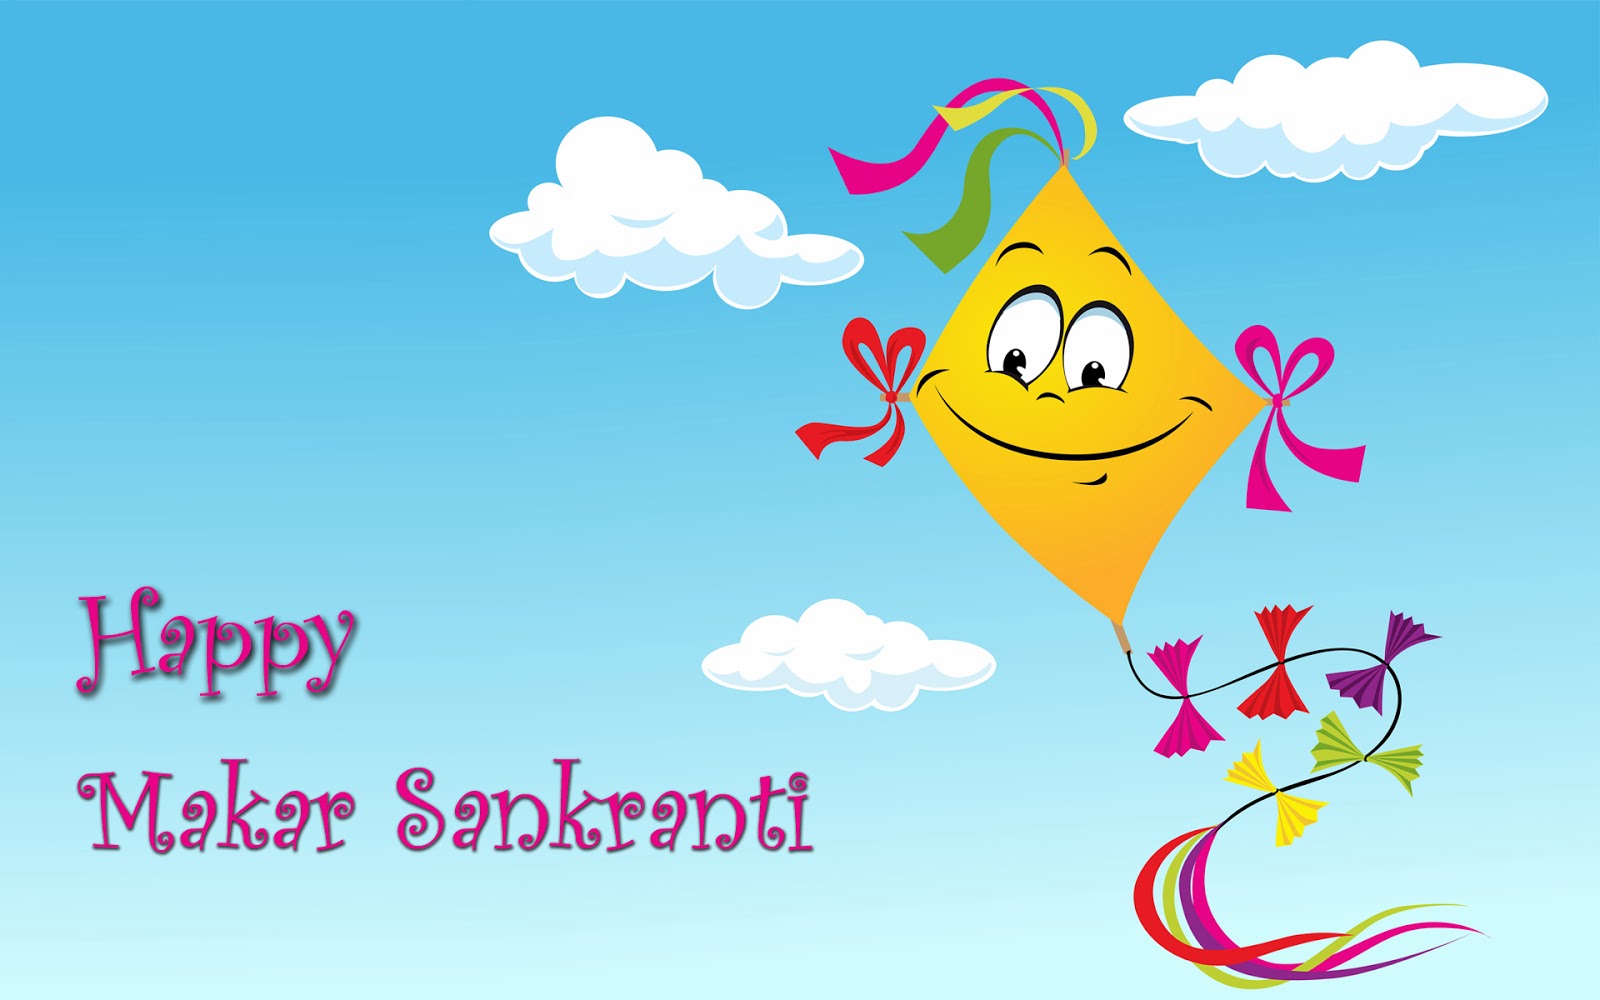 Makar Sankranti: The Great Indian Festival Of Kite Flying, Feasts, Dancing And Holy Baths